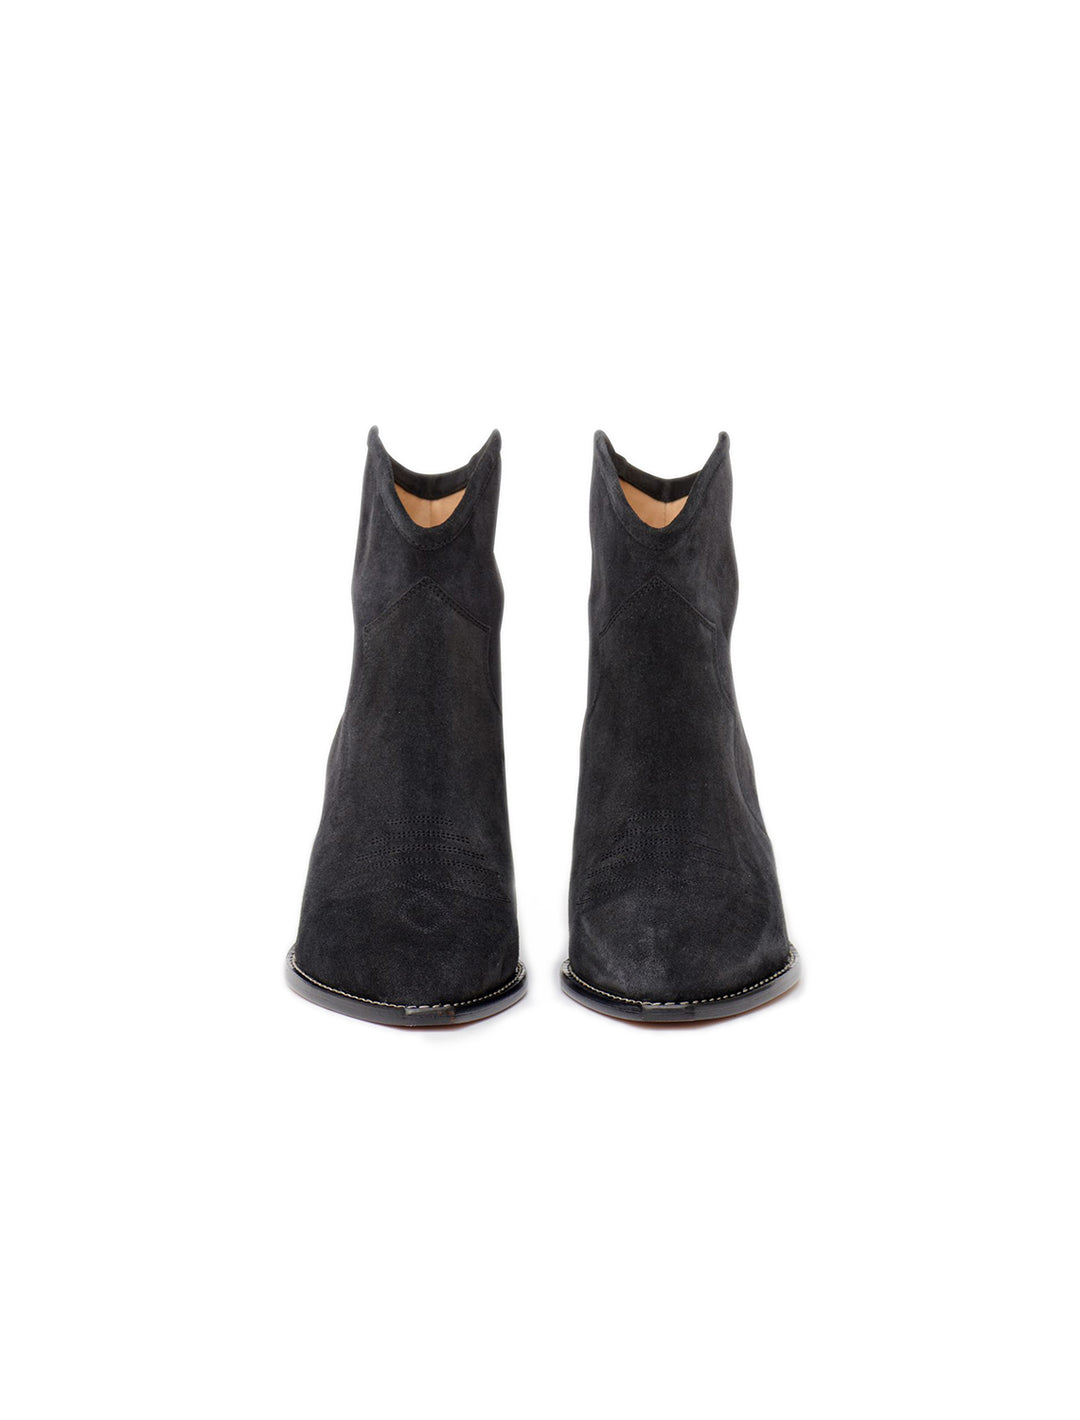 Head on view of Isabel Marant Etoile's Darizo Boot in Faded Black Suede.